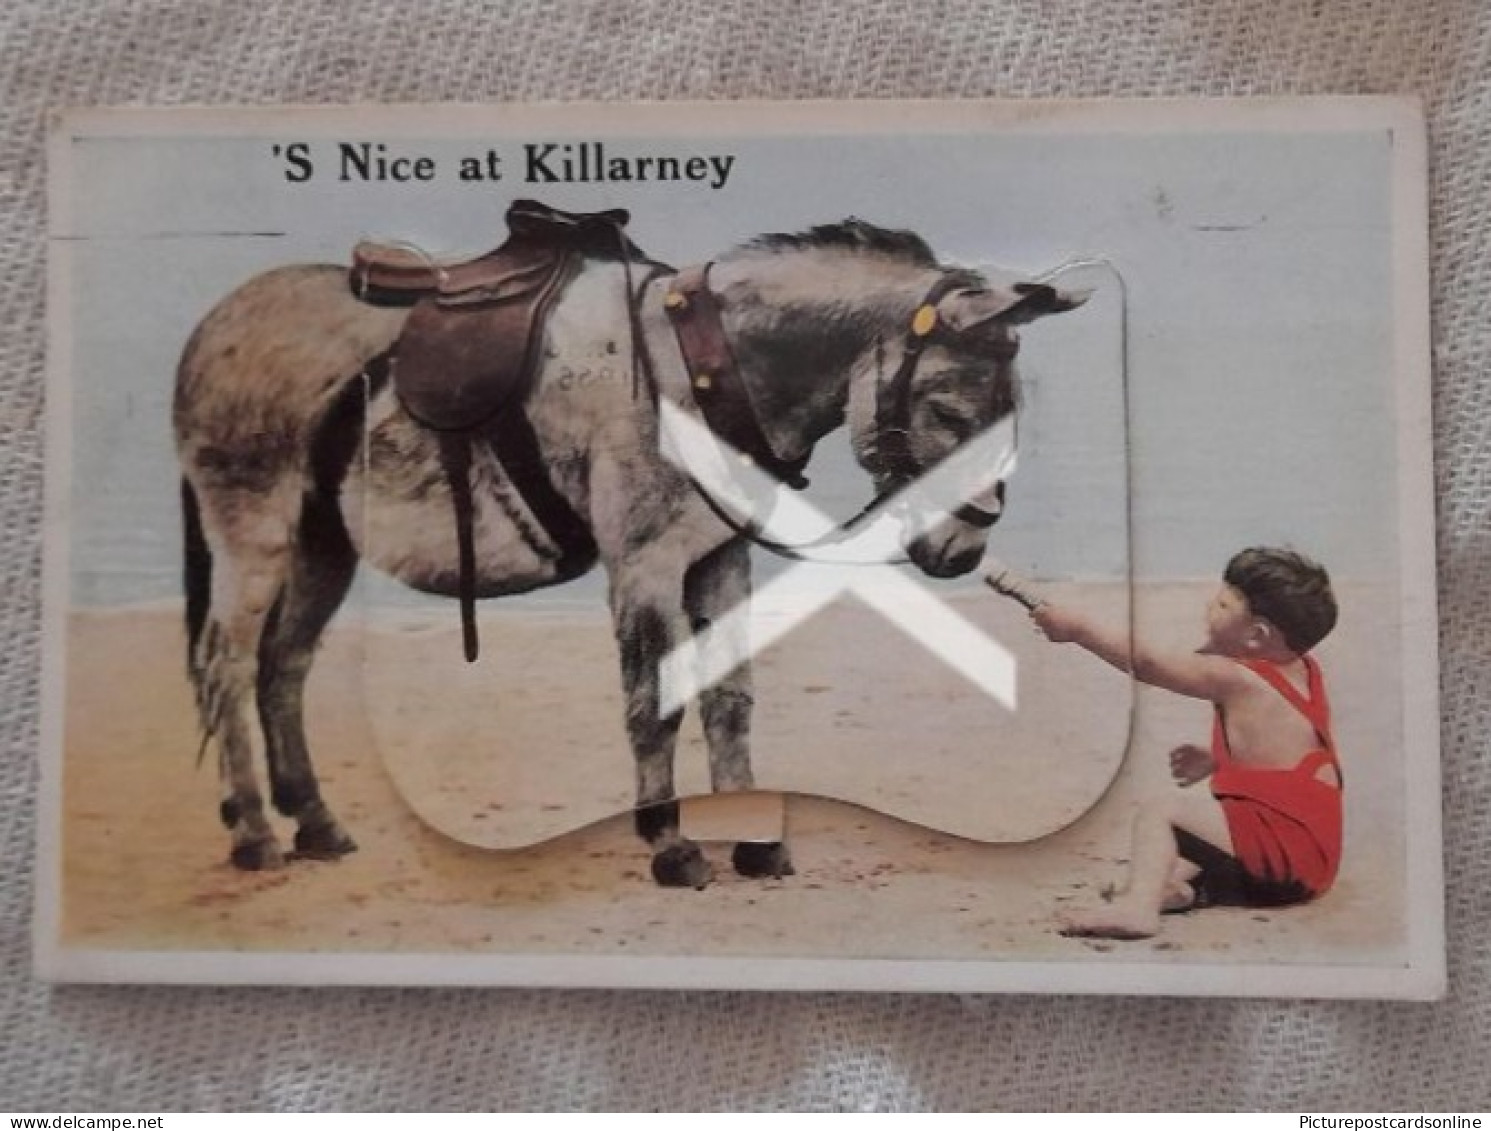 S NICE AT KILLARNEY OLD PULL OUT VIEWS NOVELTY POSTCARD COUNTY KERRY IRELAND DONKEY AND CHILD - Kerry